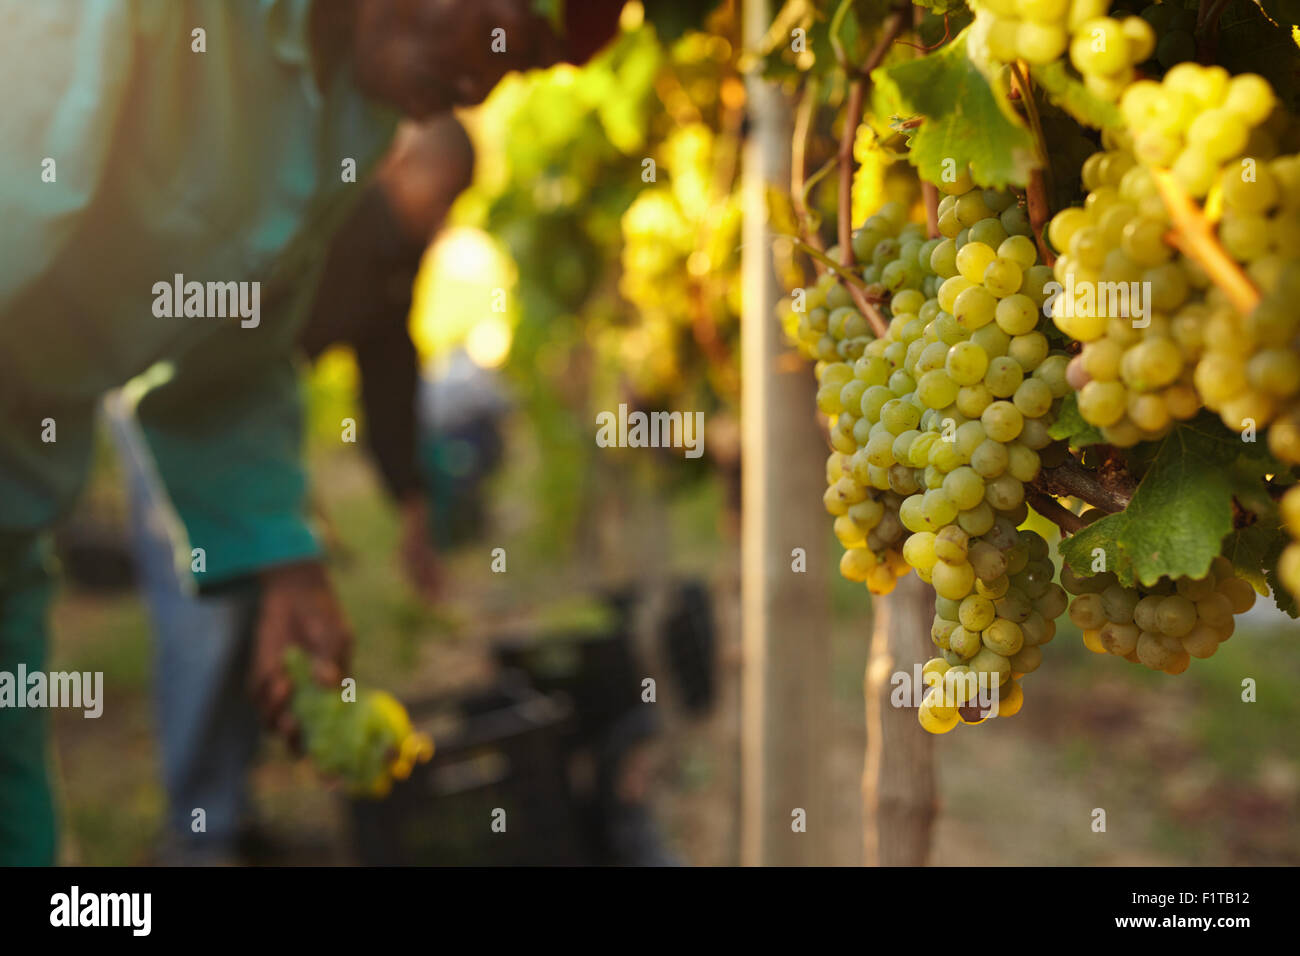 Bunch of Grapes on vines at vineyard with grape picker working in background. Stock Photo